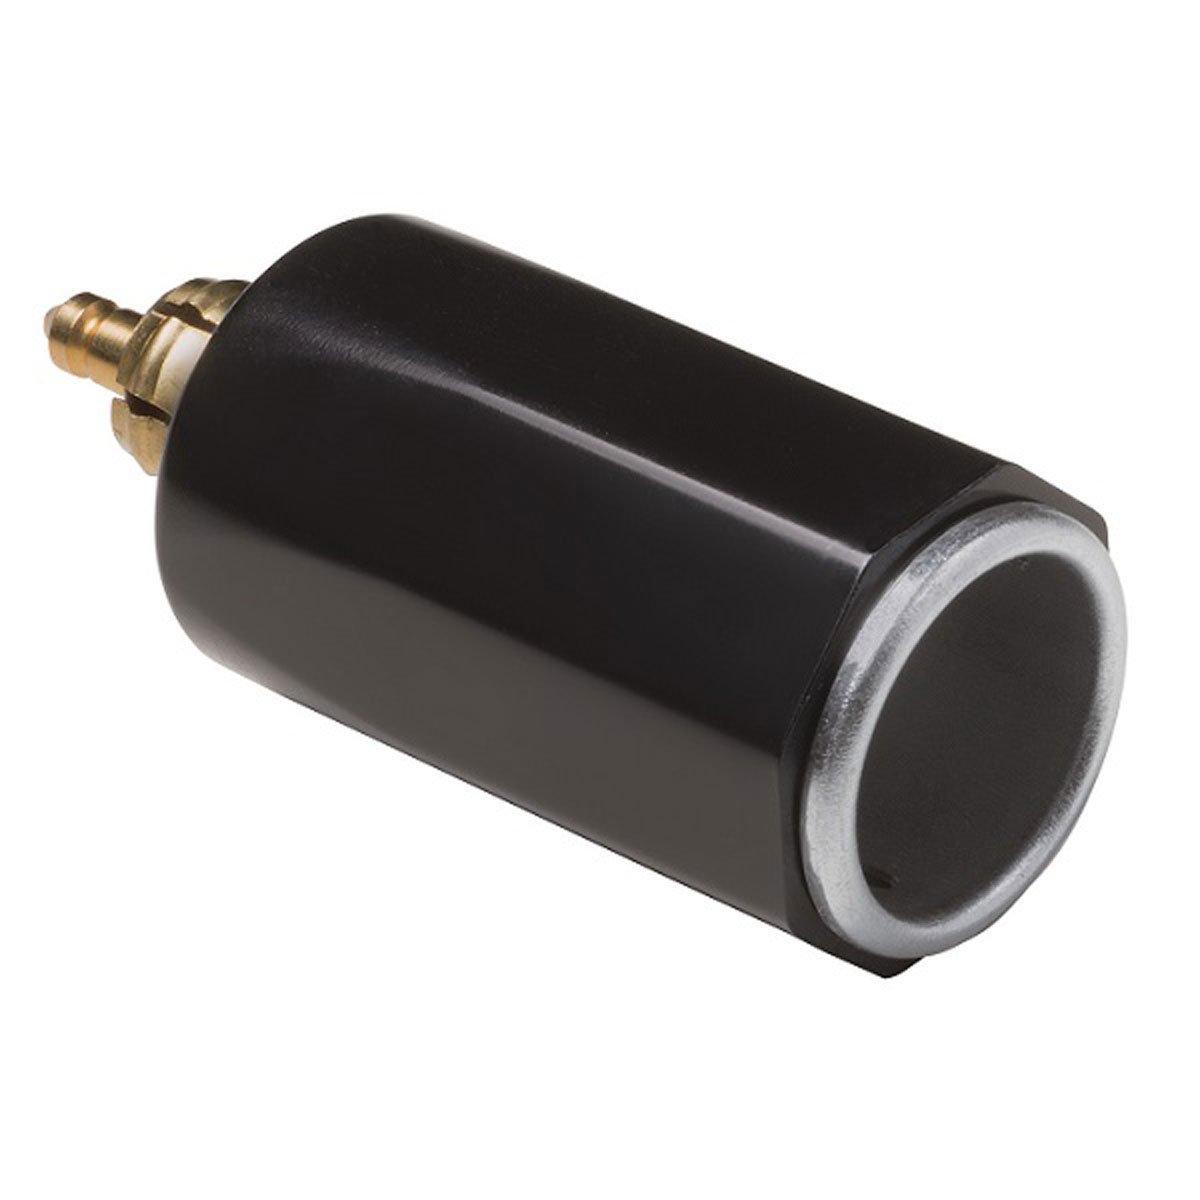 Interphone 12V Motorcycle Cigarette Adaptor - Black - Browse our range of Accessories: Headsets - getgearedshop 